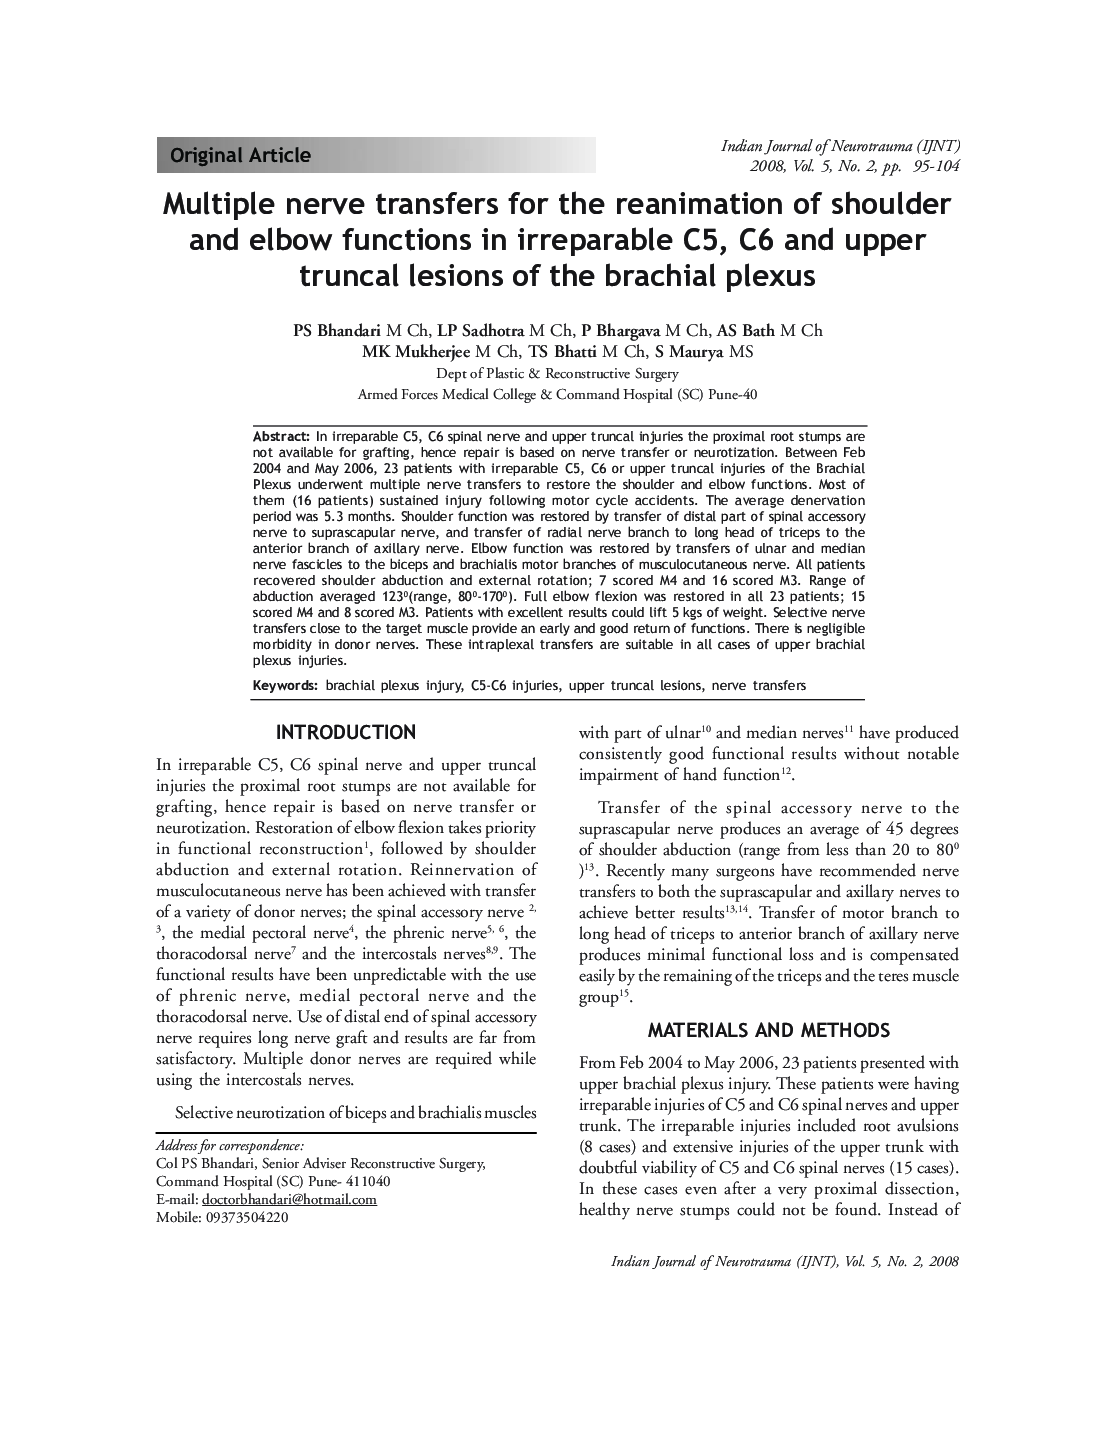 Multiple nerve transfers for the reanimation of shoulder and elbow functions in irreparable C5, C6 and upper truncal lesions of the brachial plexus